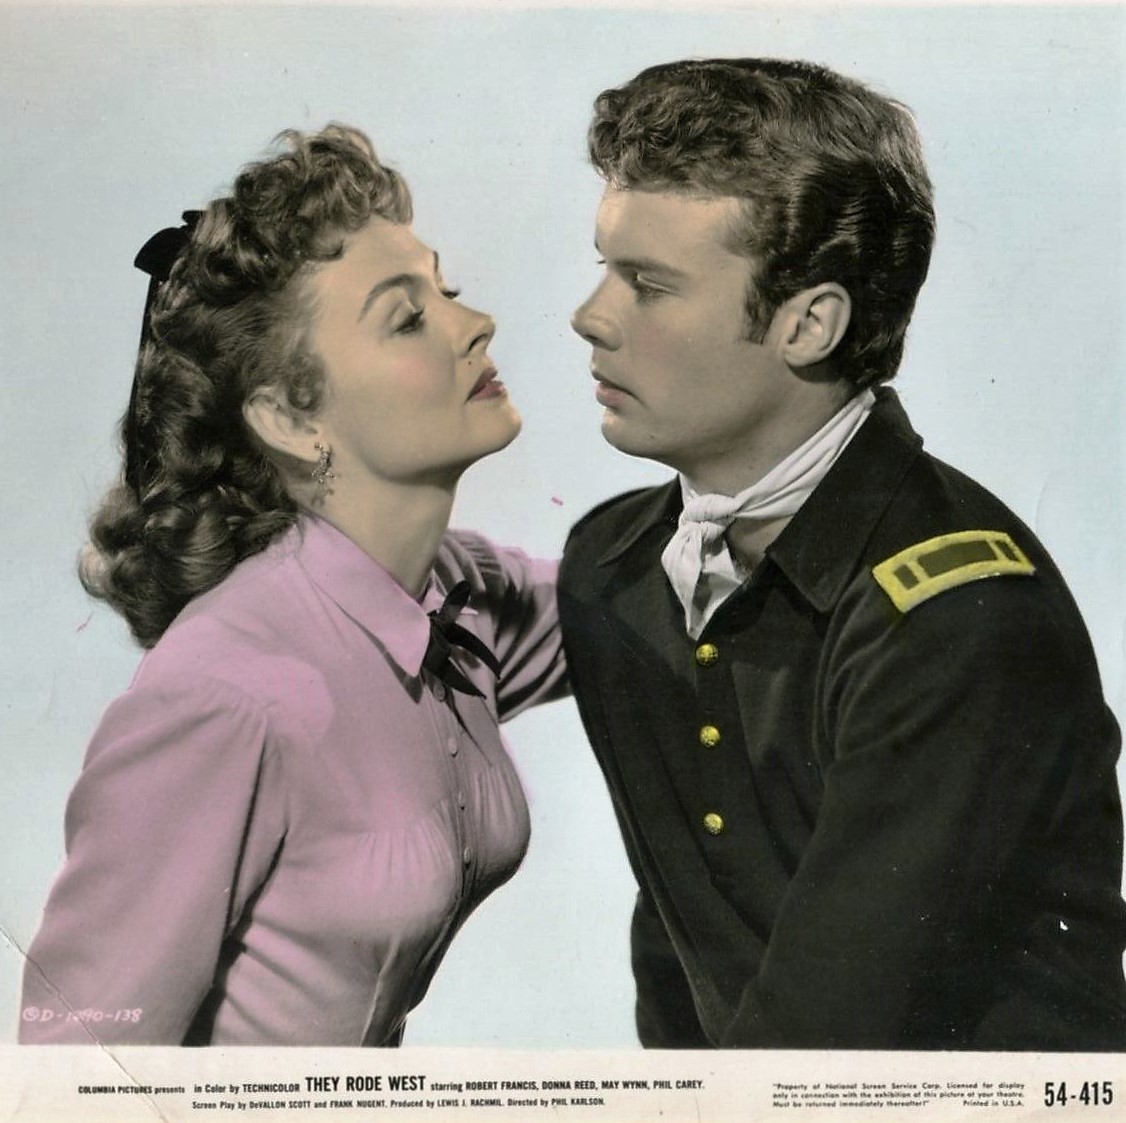  Bob with Donna Reed, his  They Rode West  co-star. Photos for promotional materials. Fall 1953. She also appeared in Bob’s screen test for  The Caine Mutiny . 